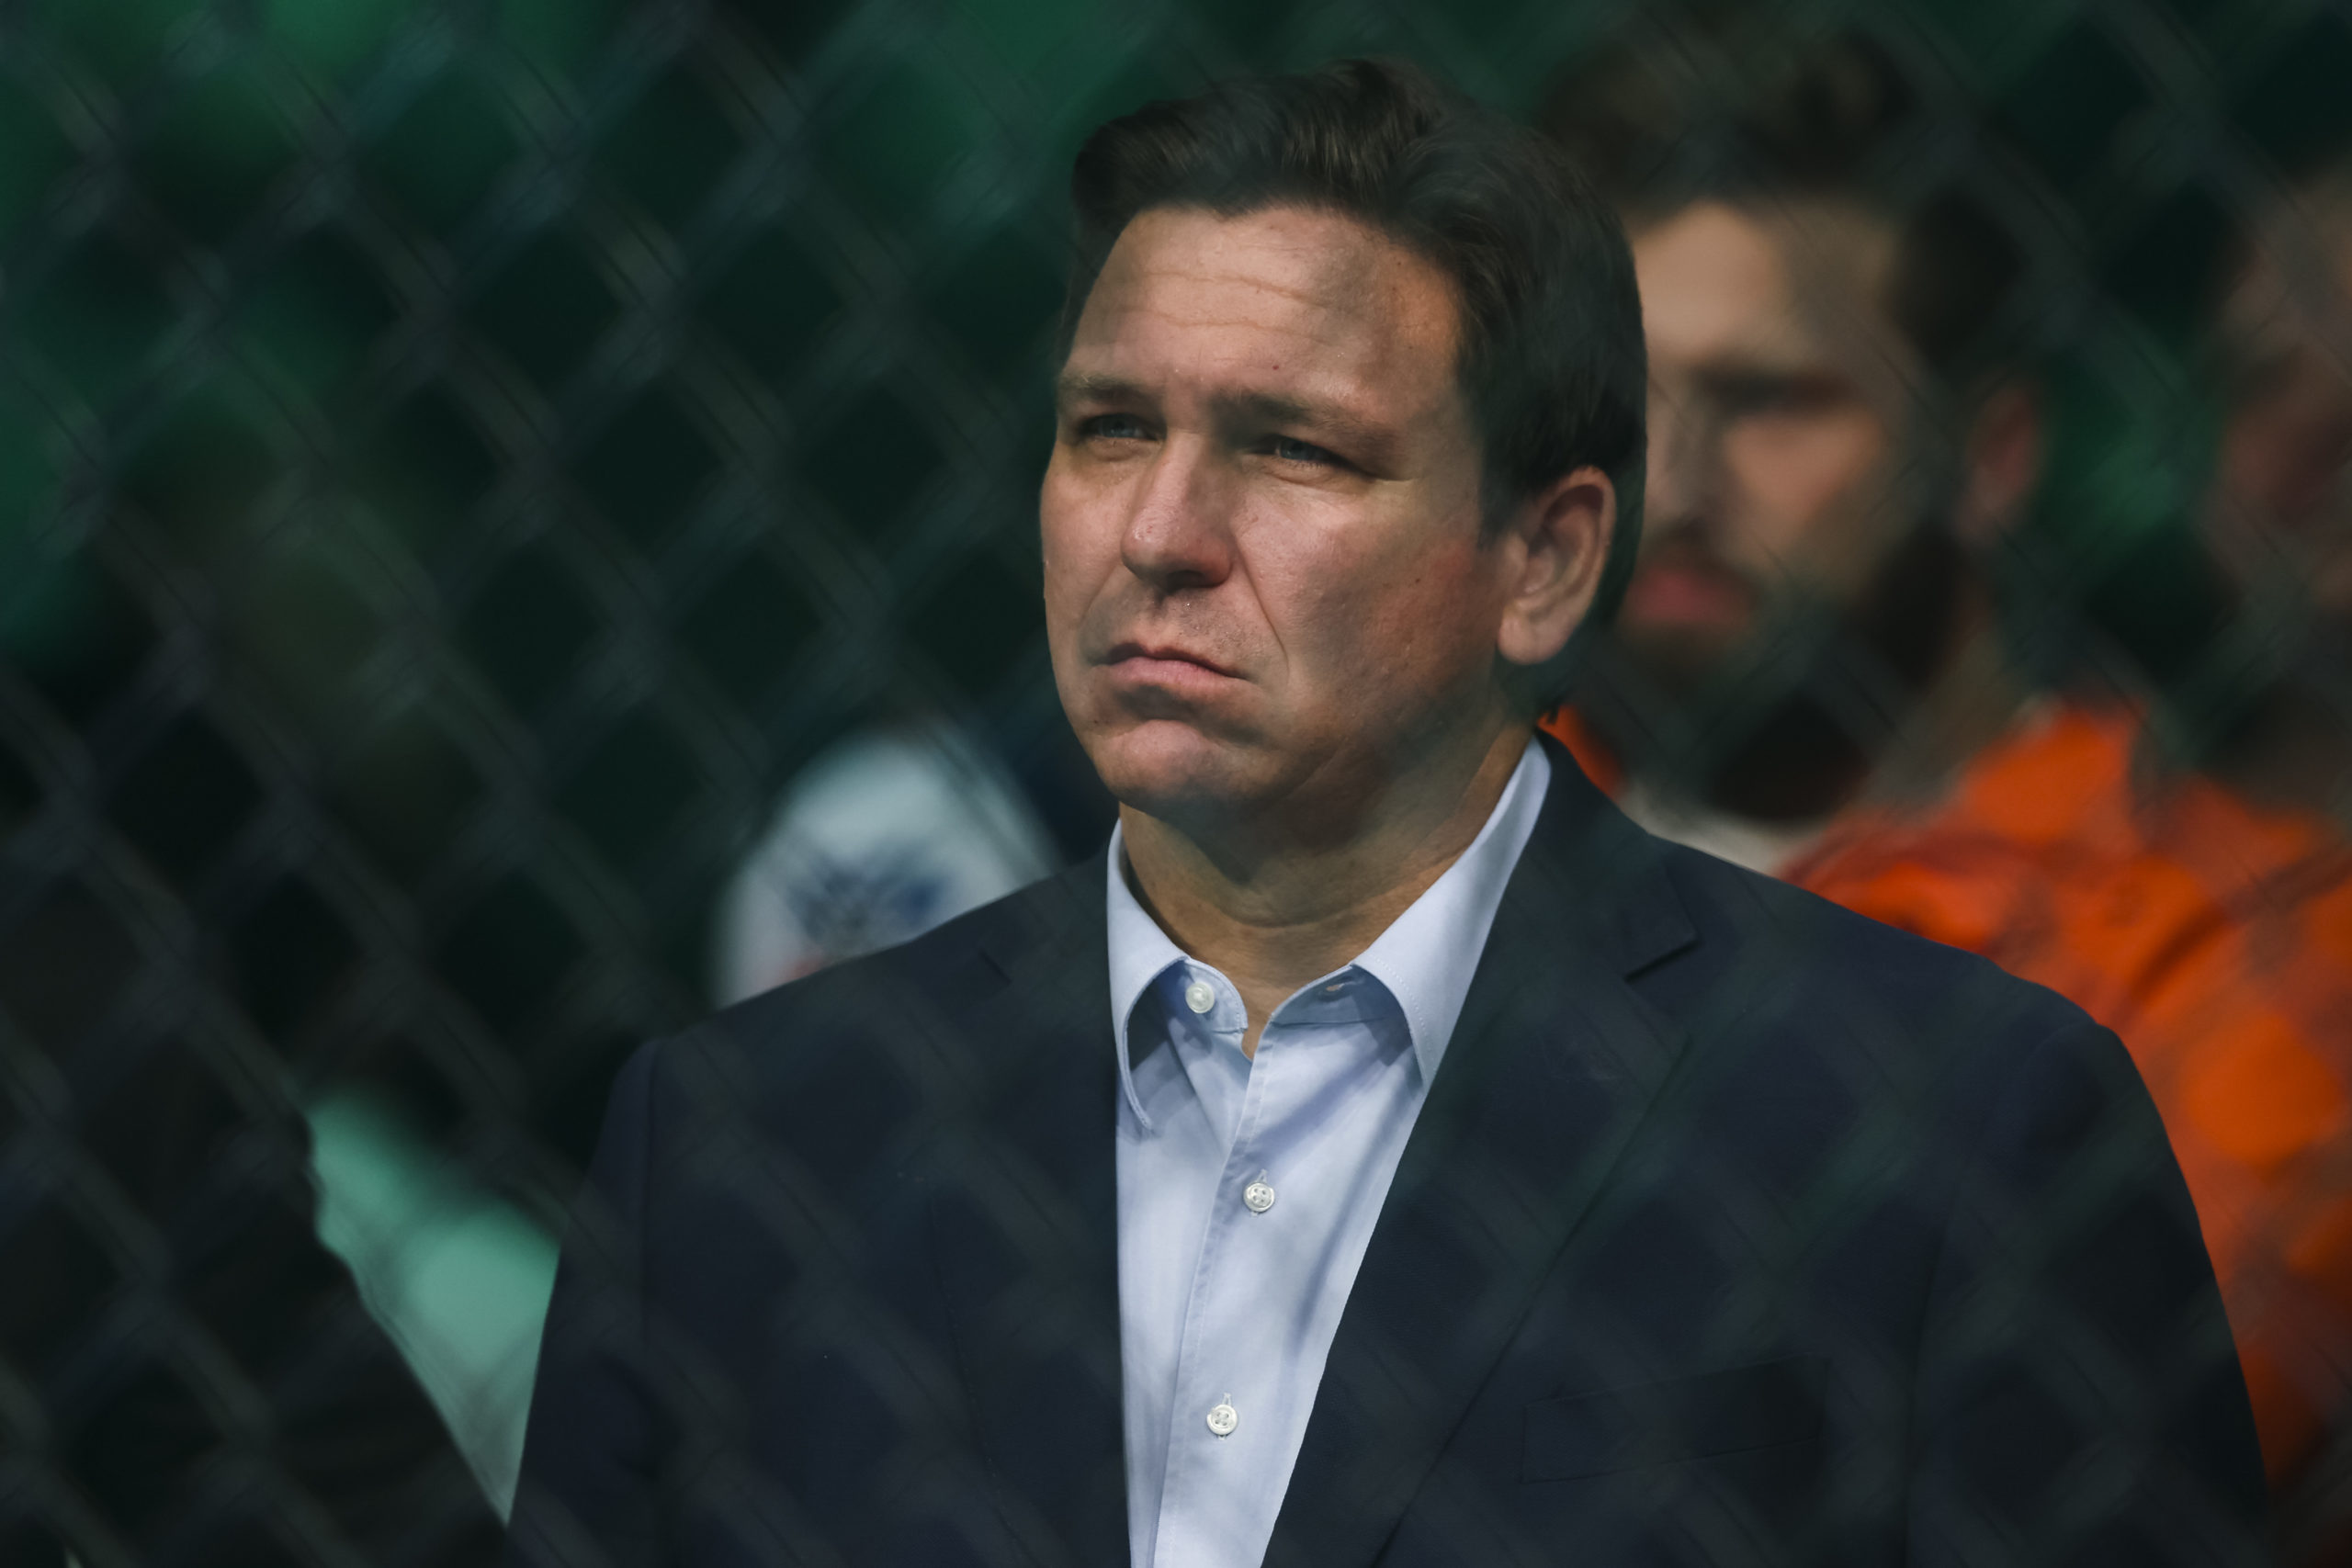 Florida governor Ron DeSantis is seen in attendance during the UFC 273 event at VyStar Veterans Memorial Arena on April 09, 2022 in Jacksonville, Florida. (Photo by James Gilbert/Getty Images)